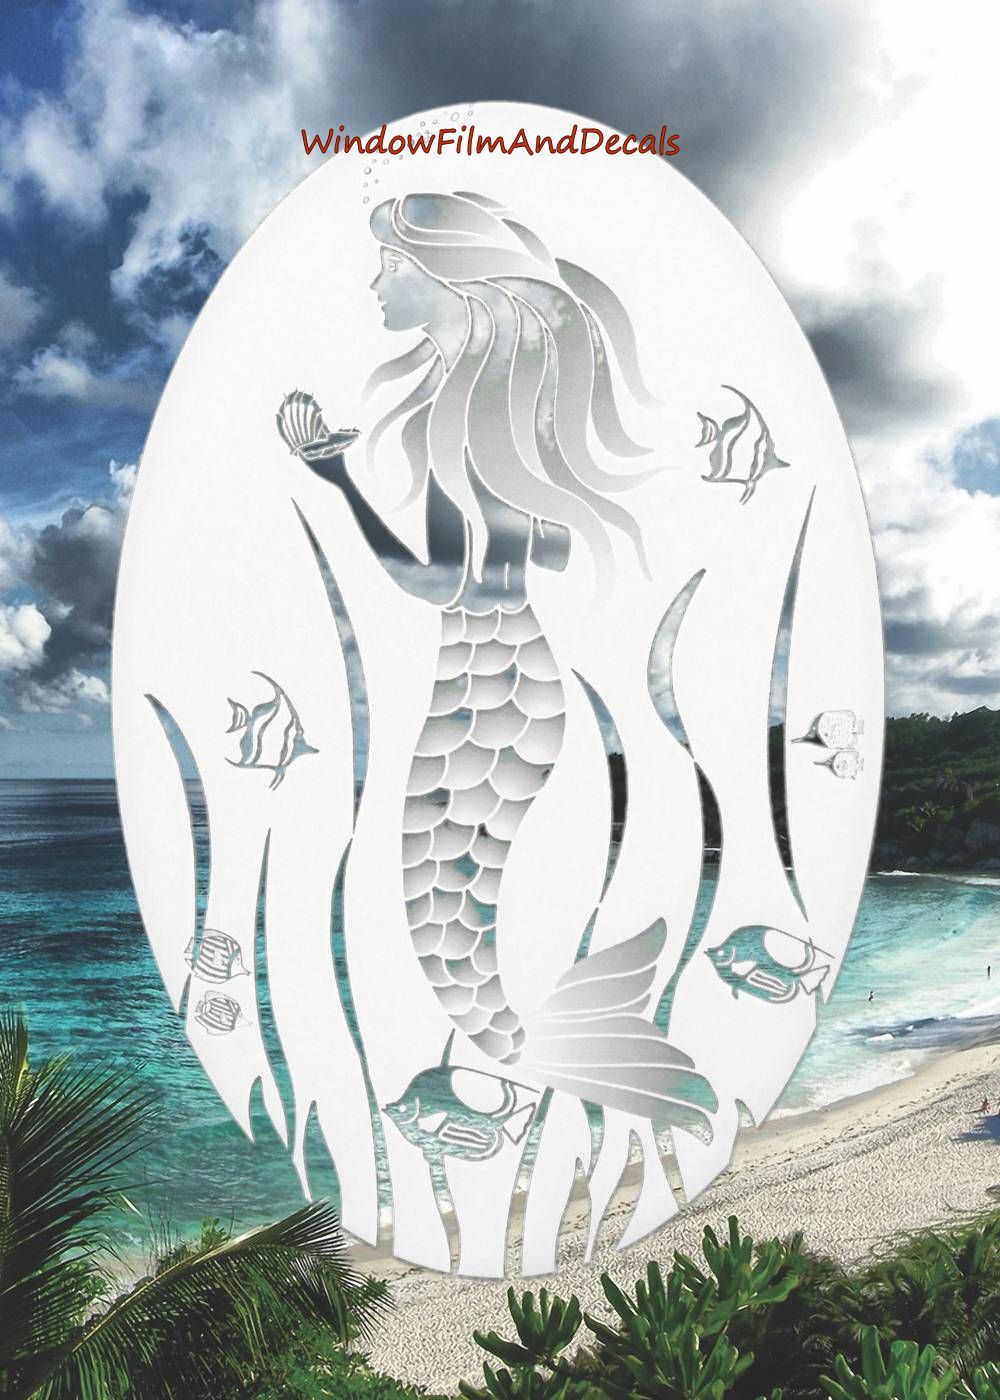 Mermaid Oval Static Cling Window Decal - White w/ Clear Design